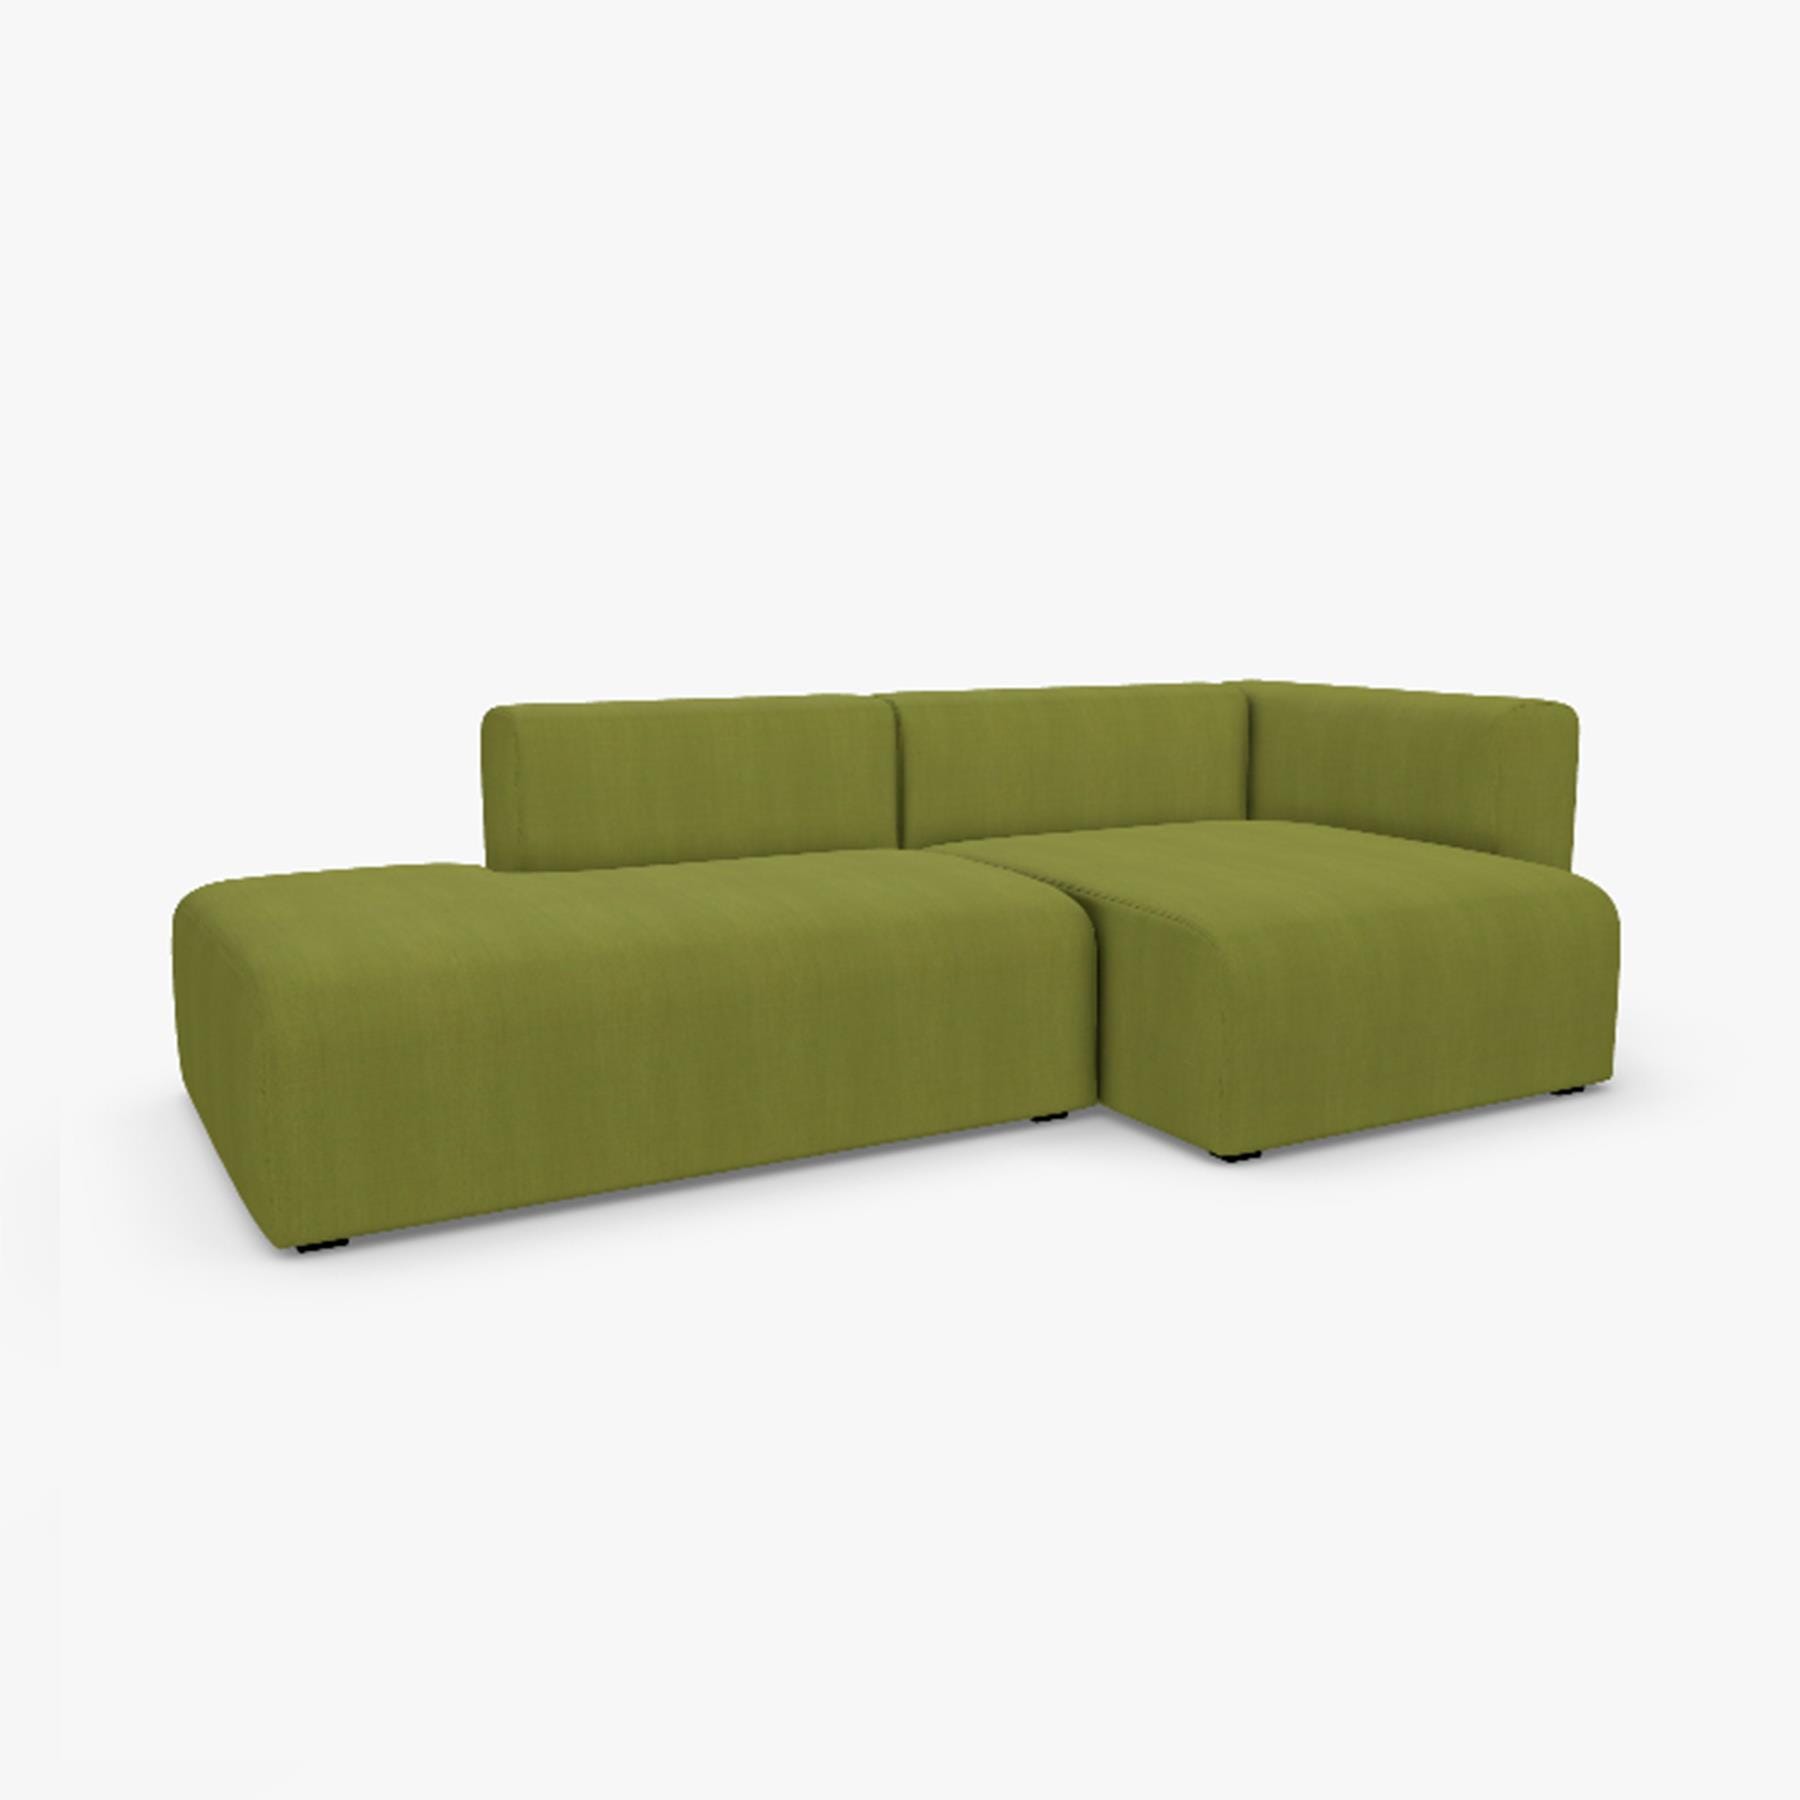 Hay Mags Sofa 25 Seater Combination 3remix 912highright Green Designer Furniture From Holloways Of Ludlow